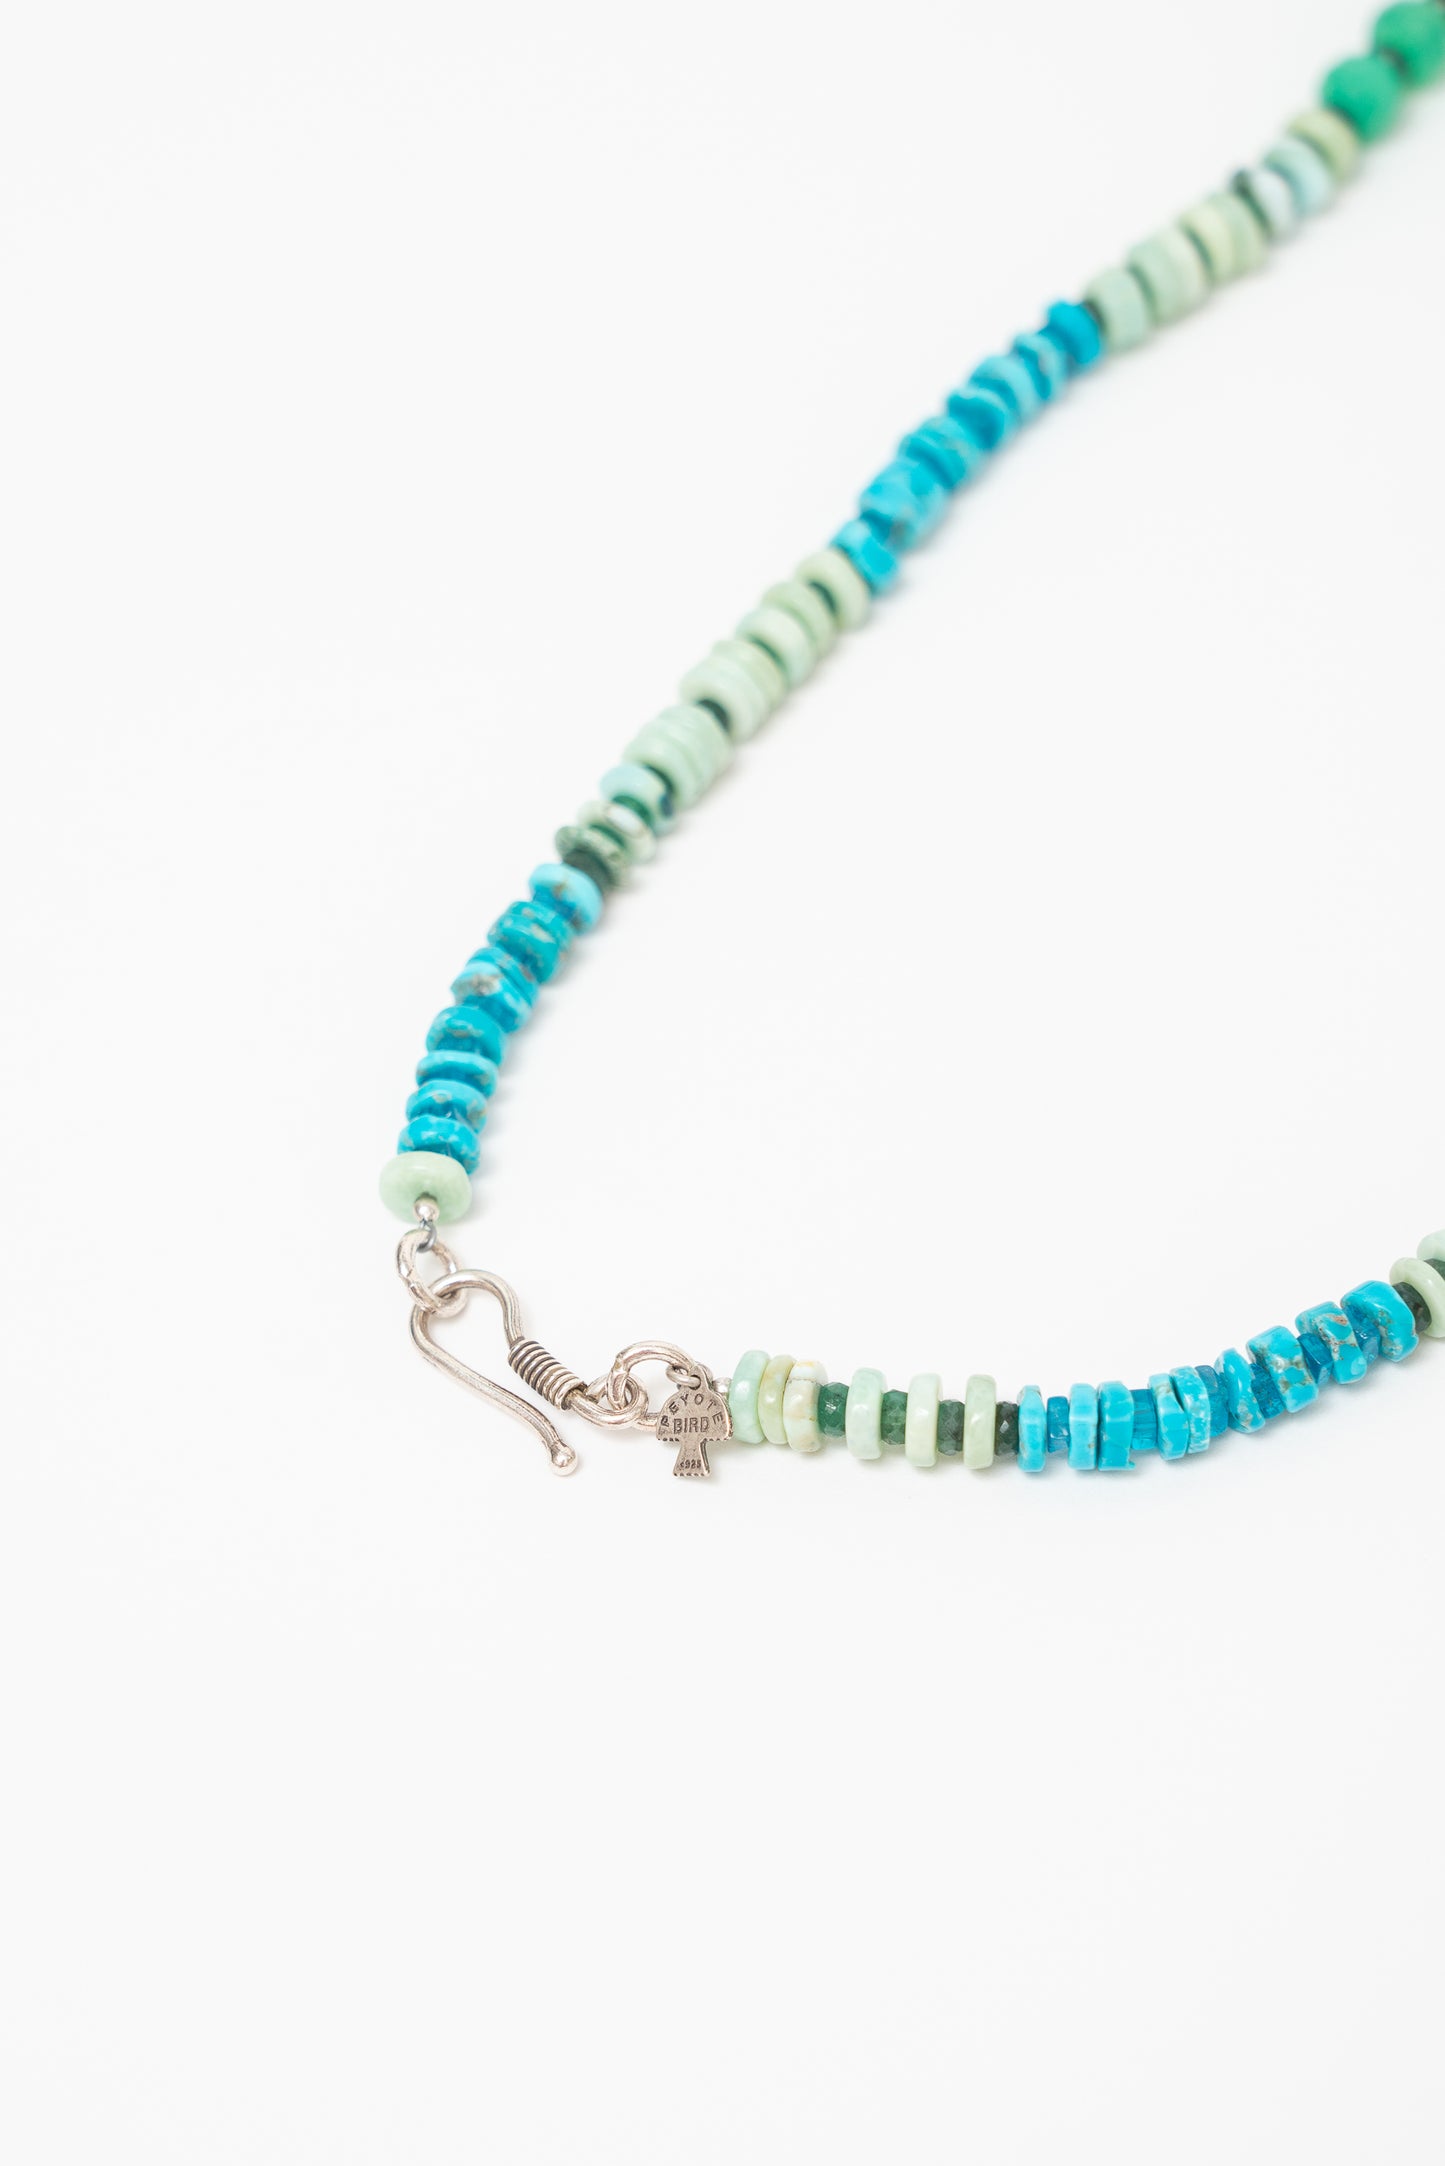 Dominica Necklace - 18"